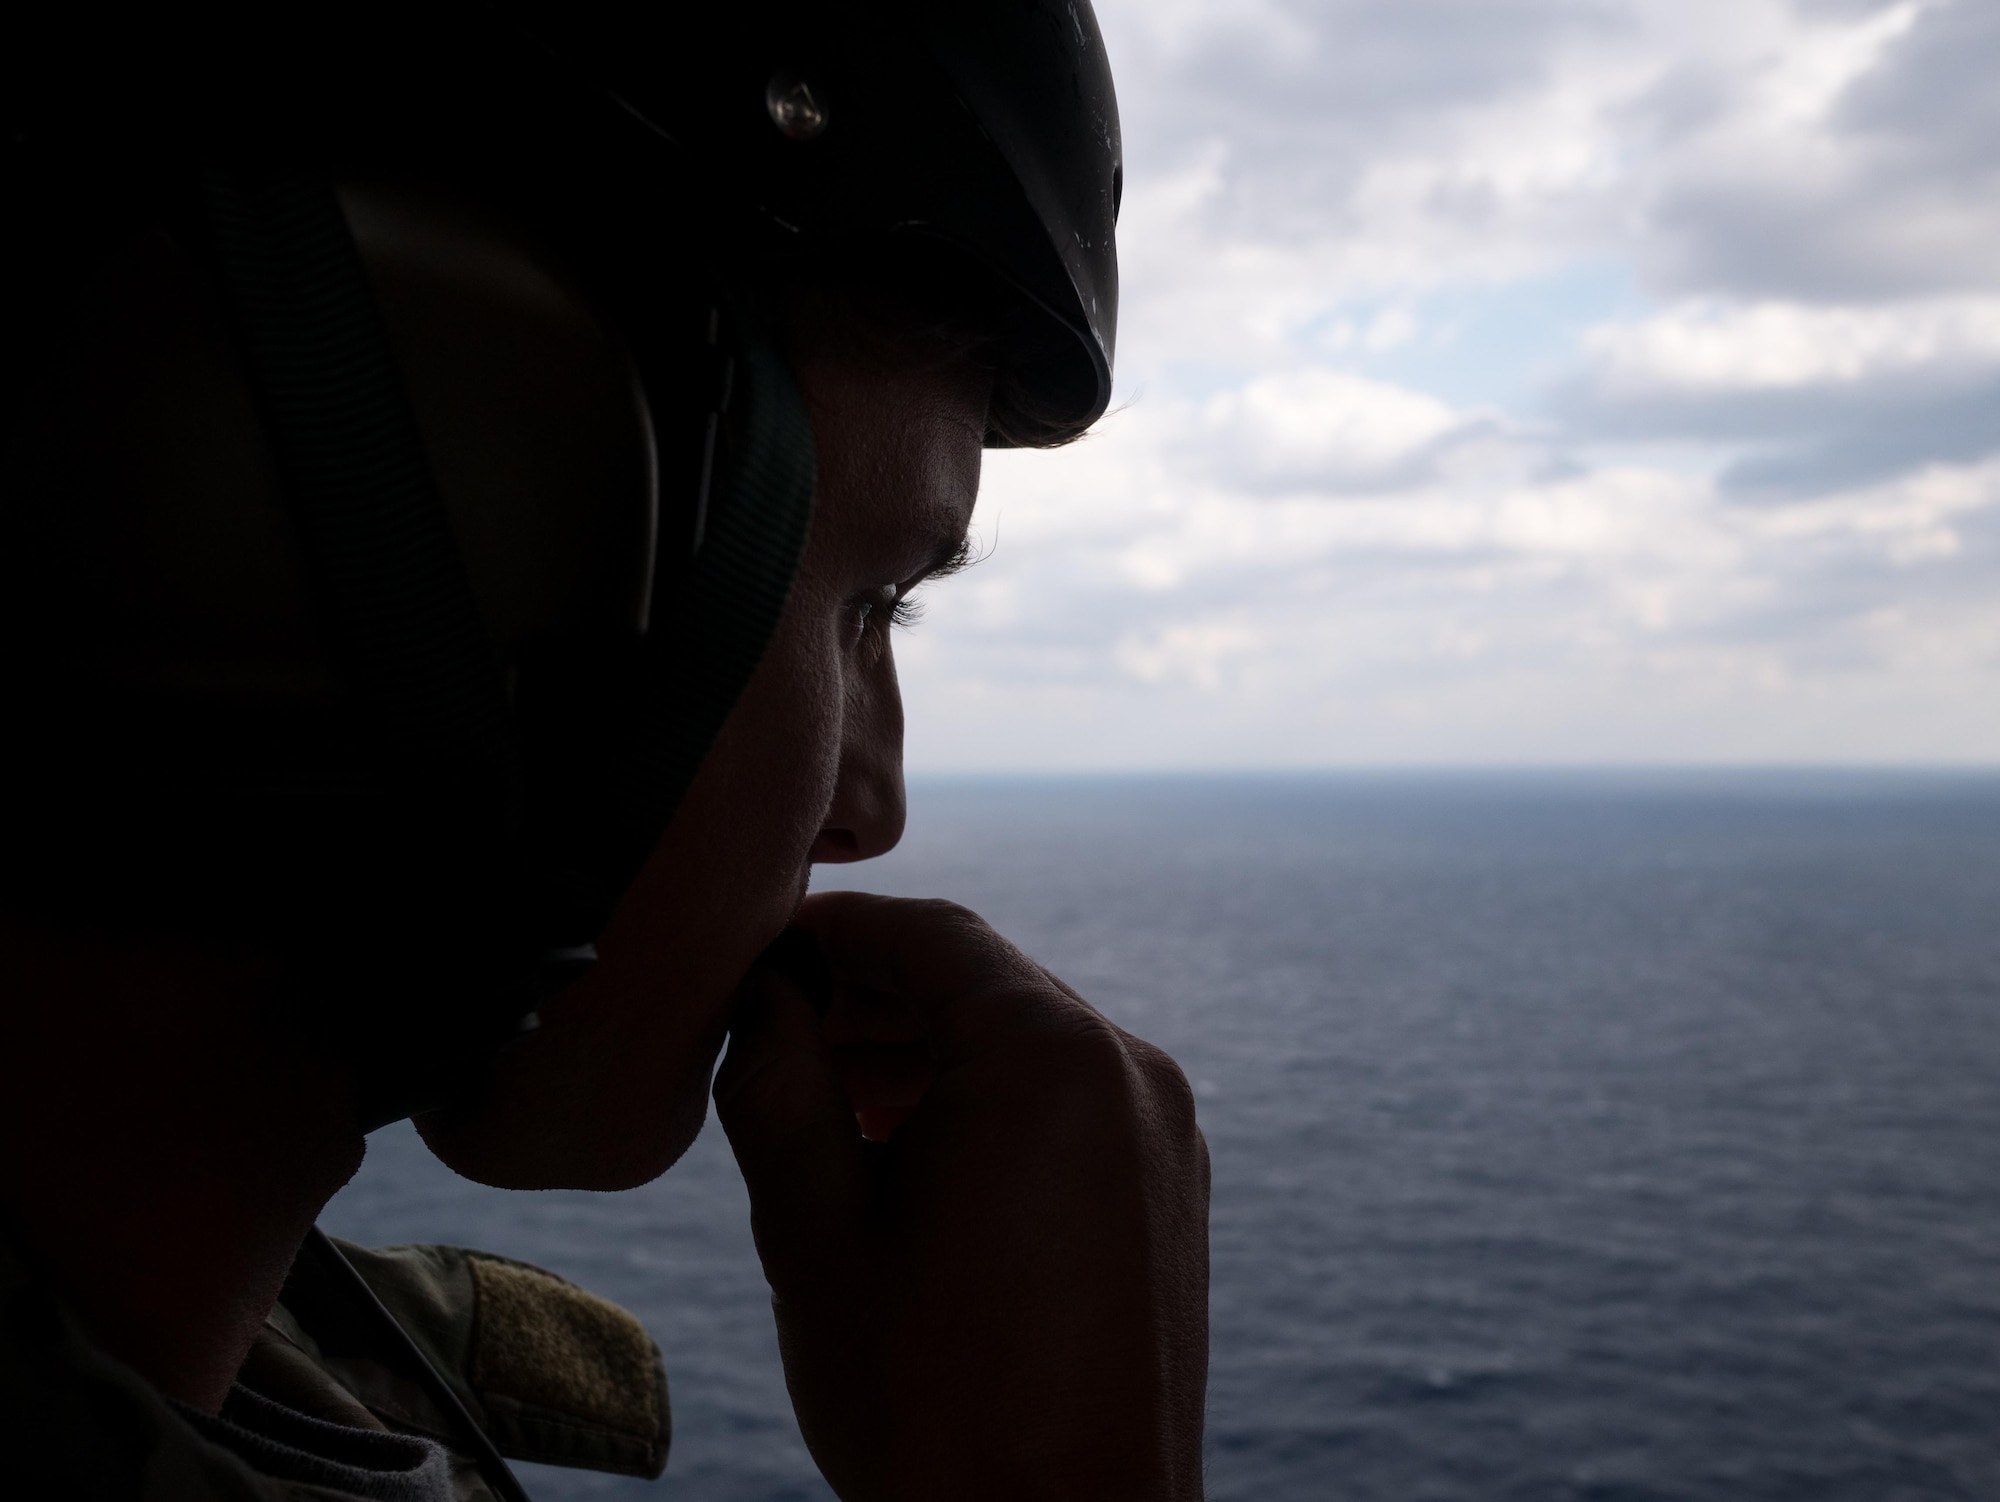 Staff Sgt. Caleb Williams, 18th Operations Support Squadron SERE specialist, performs a communications check aboard a HH-60G Pave Hawk helicopter assigned to the 33rd Rescue Squadron for exercise Keen Sword Nov. 4, 2016, off the coast of Okinawa, Japan. During the exercise, combat rescue teams train to increase the interoperability required to support the defense of Japan, respond to a potential crisis and offer humanitarian assistance.